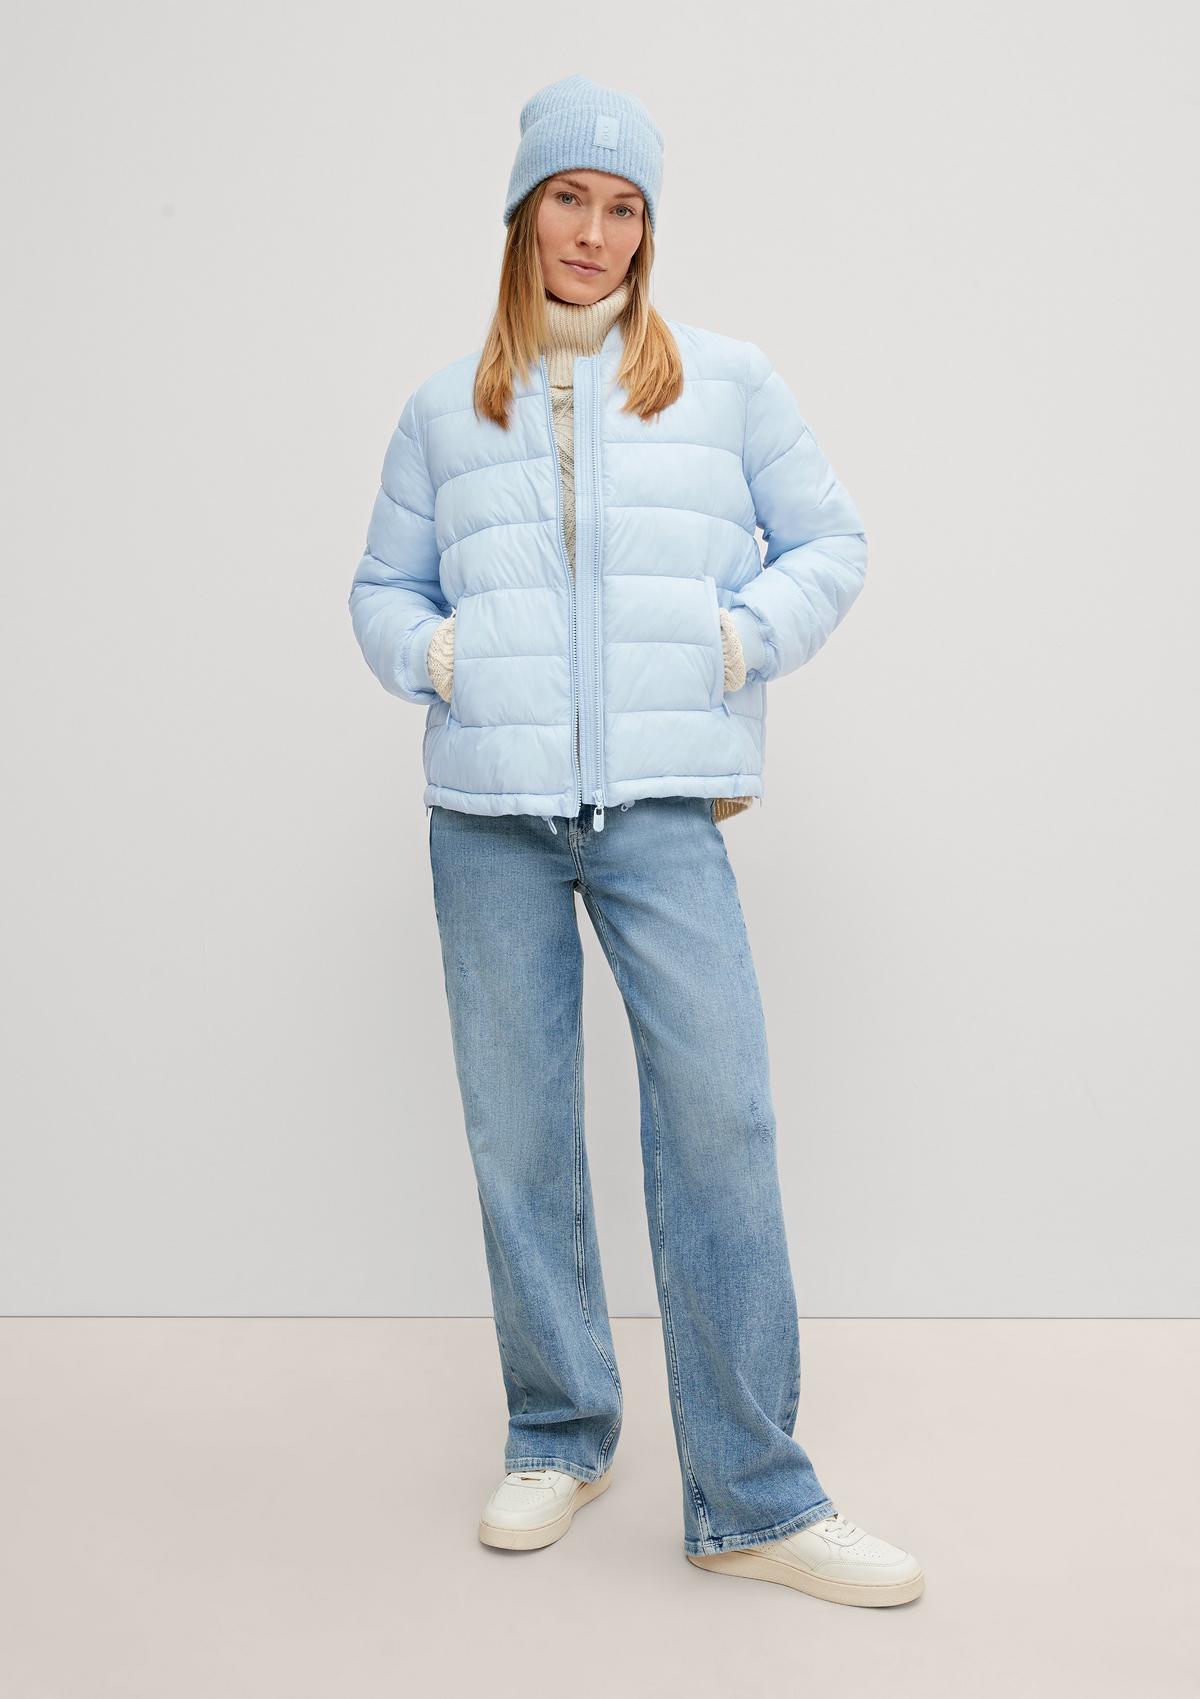 Quilted jacket in a boxy fit - light lemon